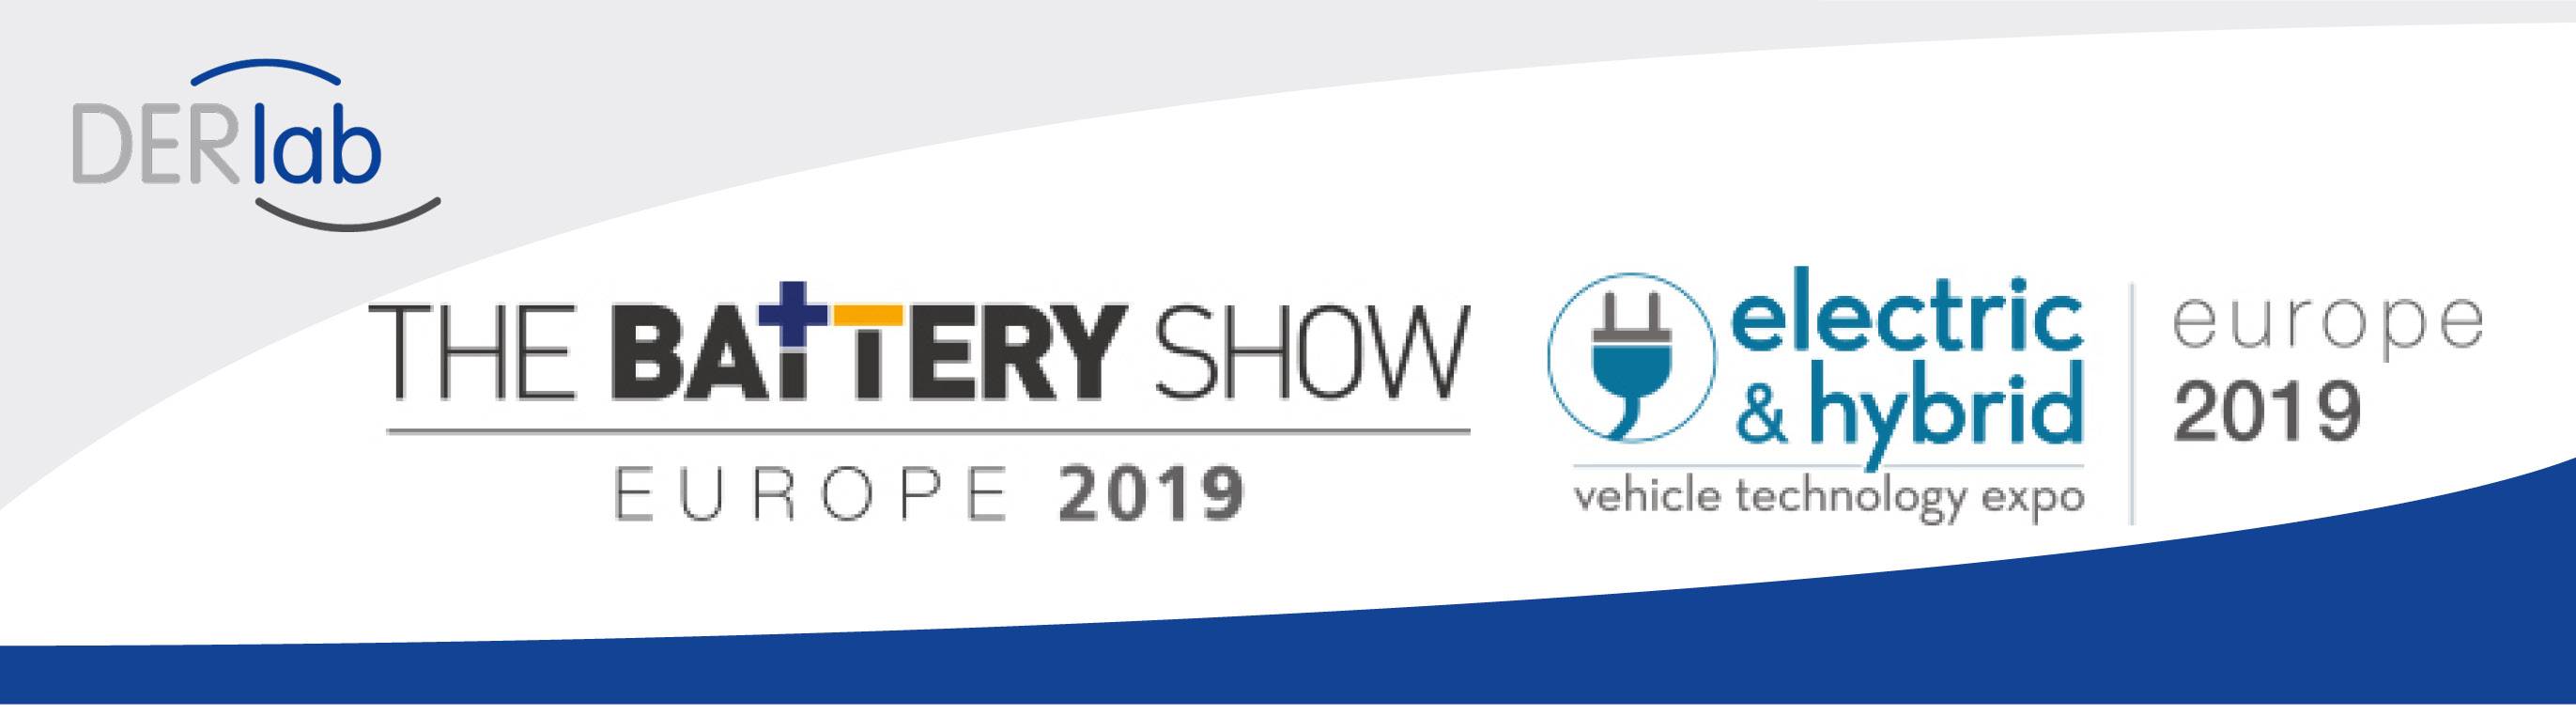 The Battery Show Europe 2019 : Agenda and first announcement of speakers for battery and electric vehicle conferences